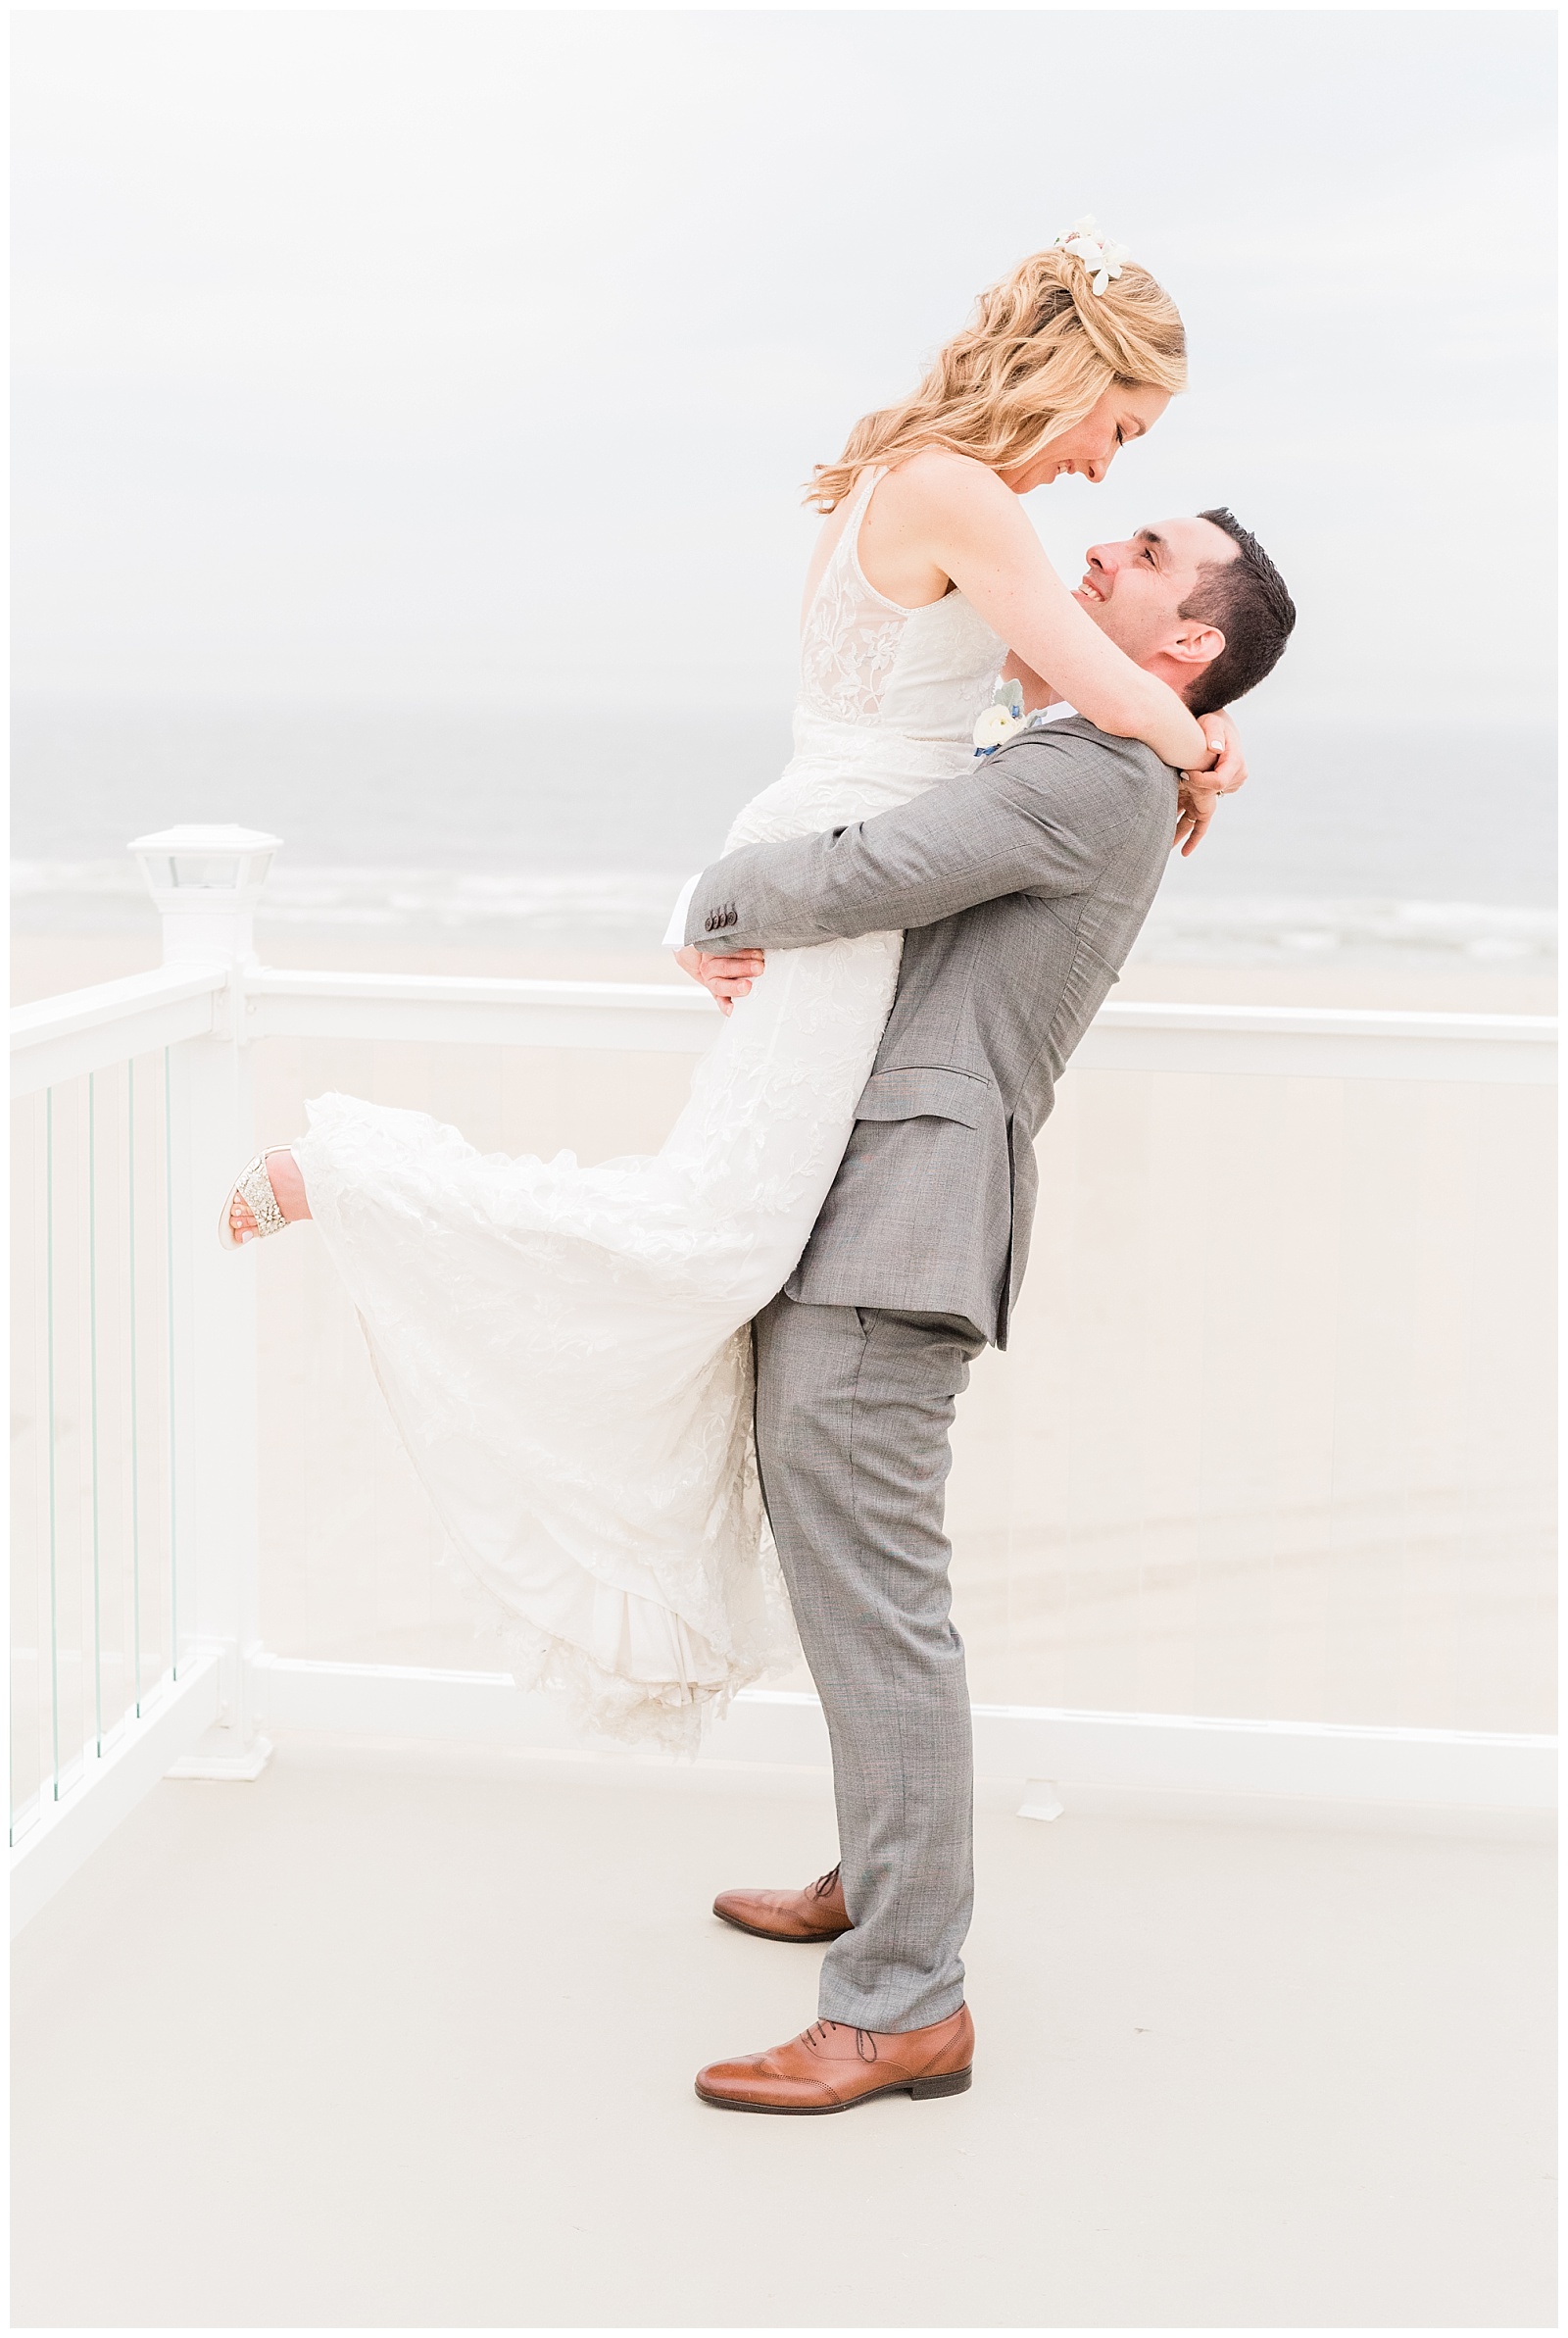 Groom lifts up the bride on a deck overlooking the beach.